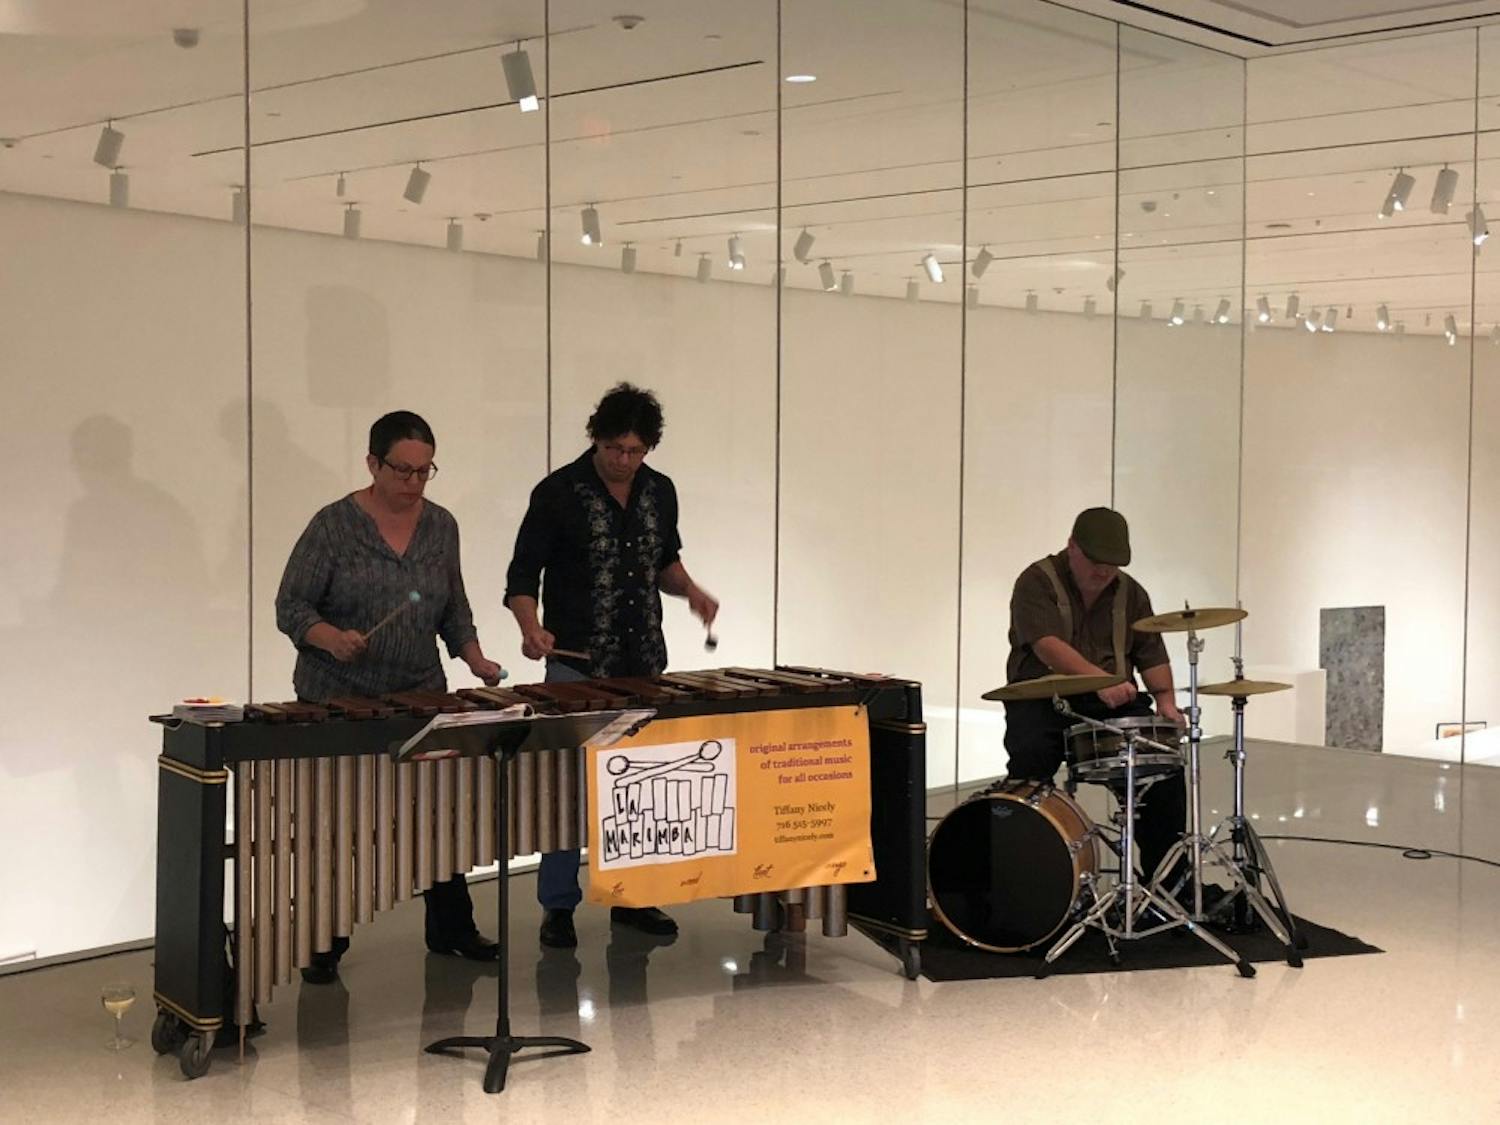 La Marimba takes over the Burchfield Art Center for the annual Riverrun Global Film Series. The traditional marimba music of Mexico and Central America are accompanied by the bands witty humor during Friday’s event.